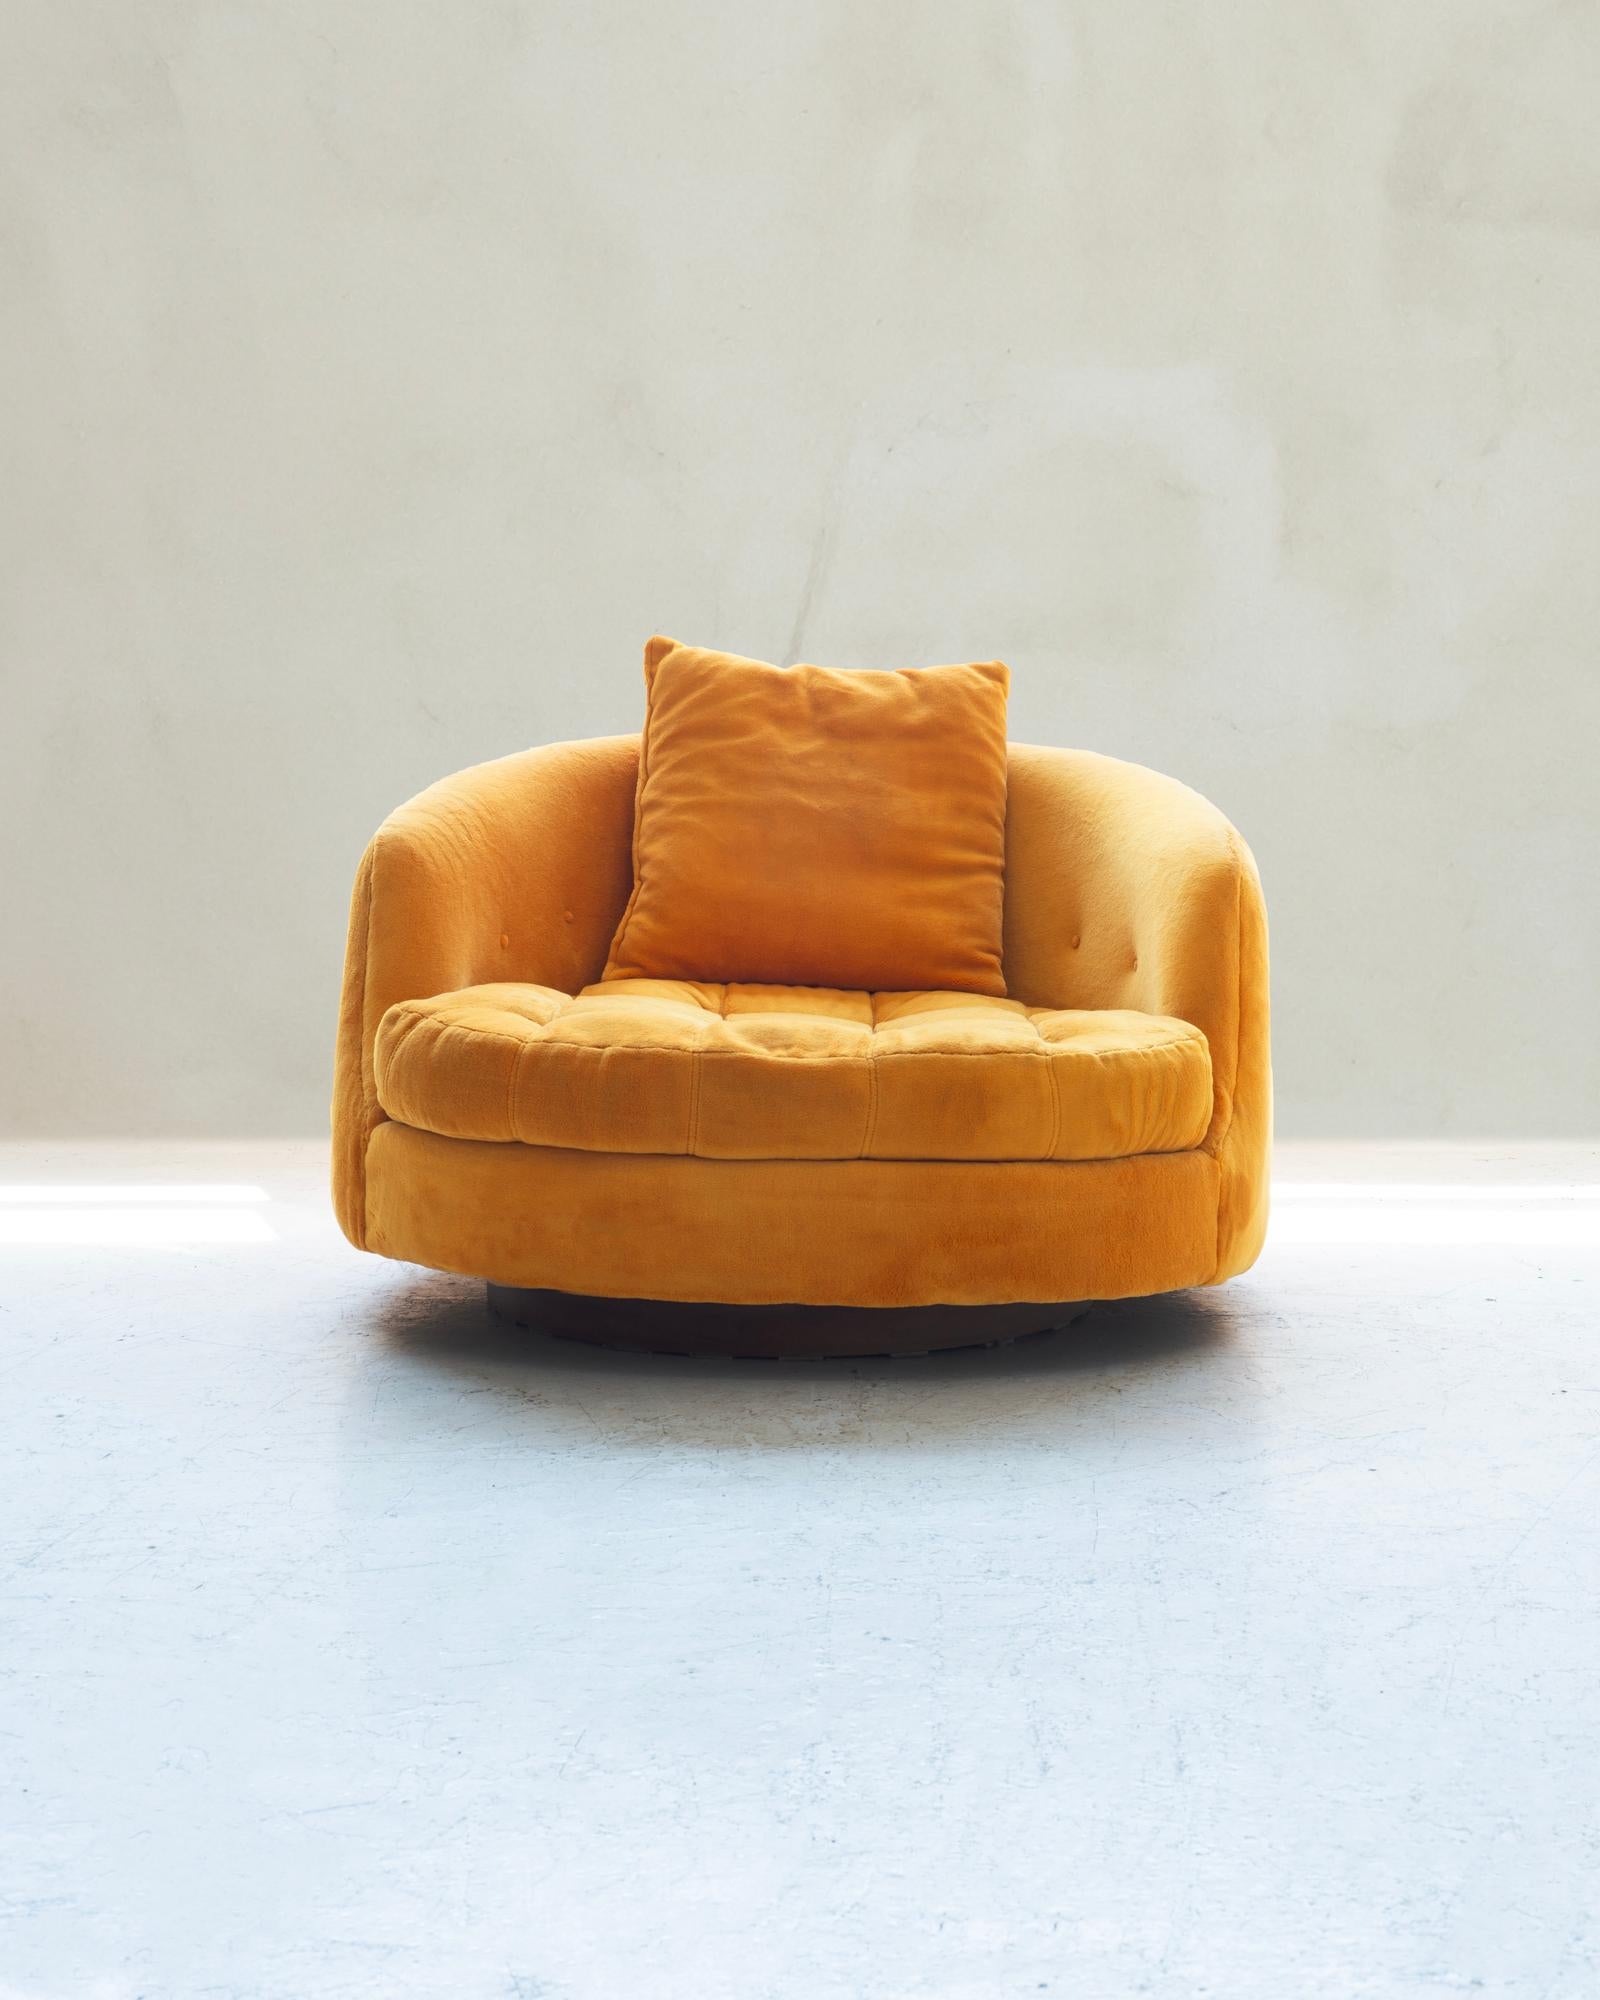 A luxurious oversized swivel tub chair designed by Milo Baughman for Thayer Coggin. This exquisite piece boasts its original upholstery, preserving the authentic charm of its era. The back features elegant button detailing, while the seat is